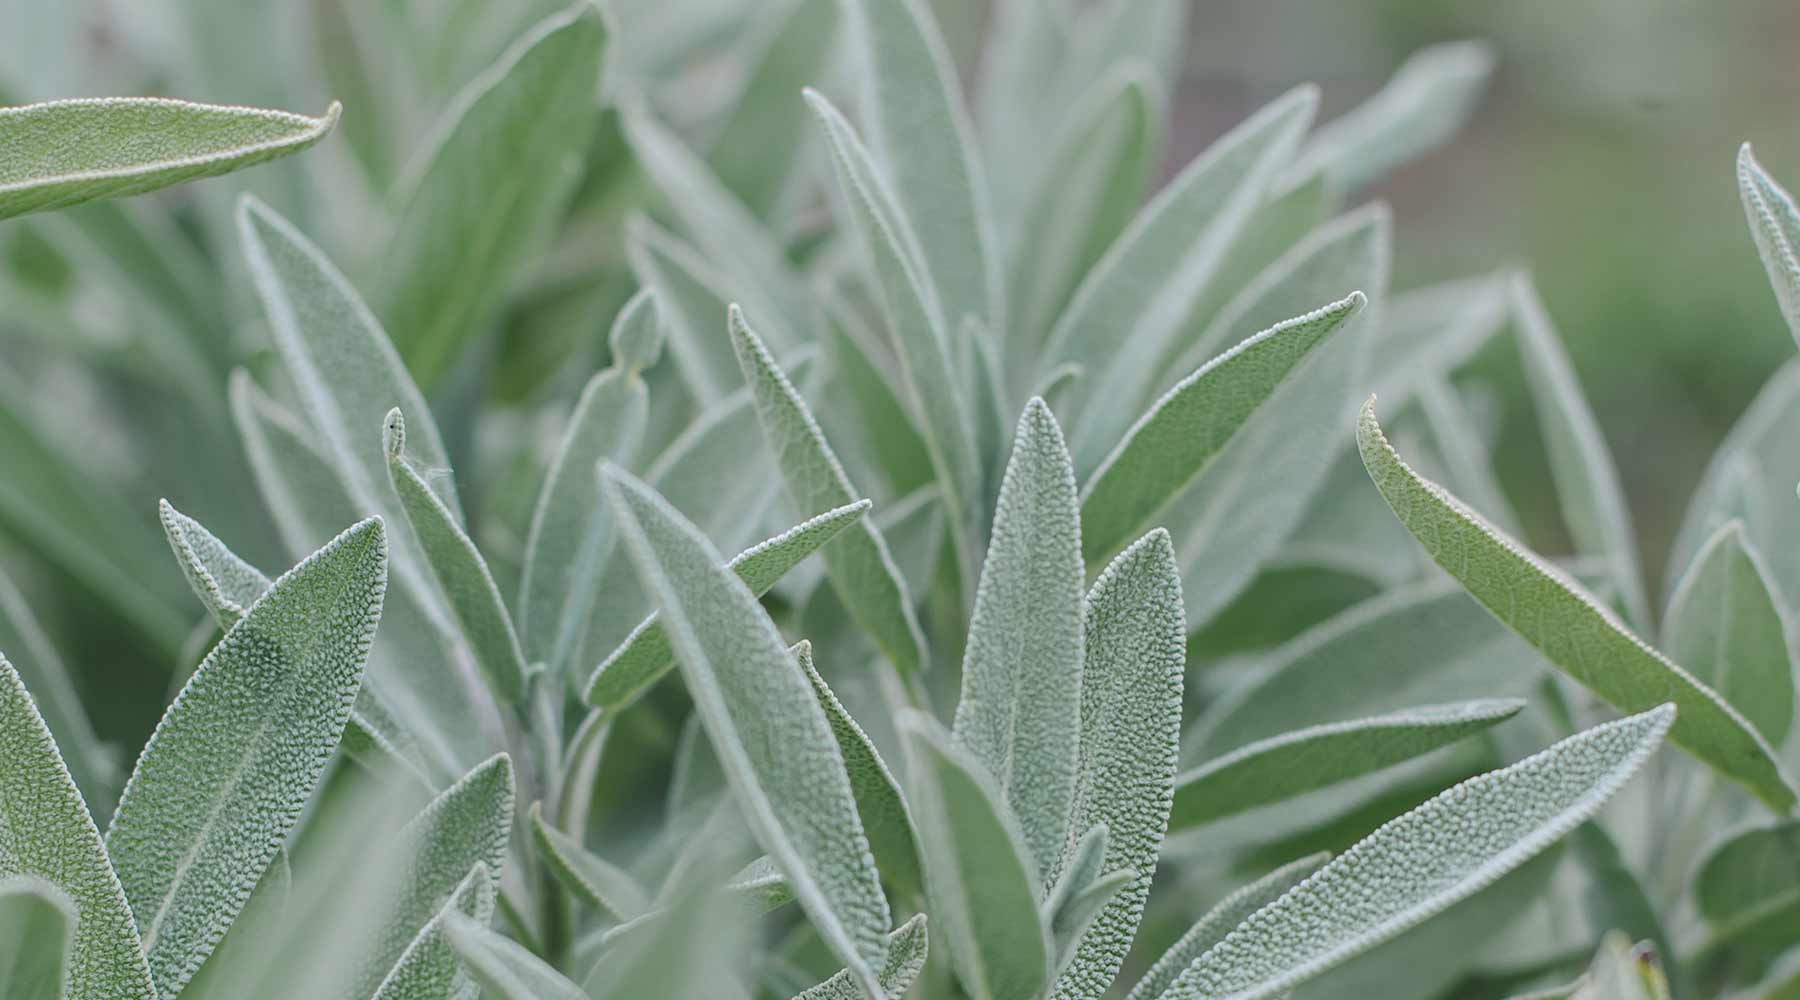 The Medicinal Uses and Health Benefits of Sage